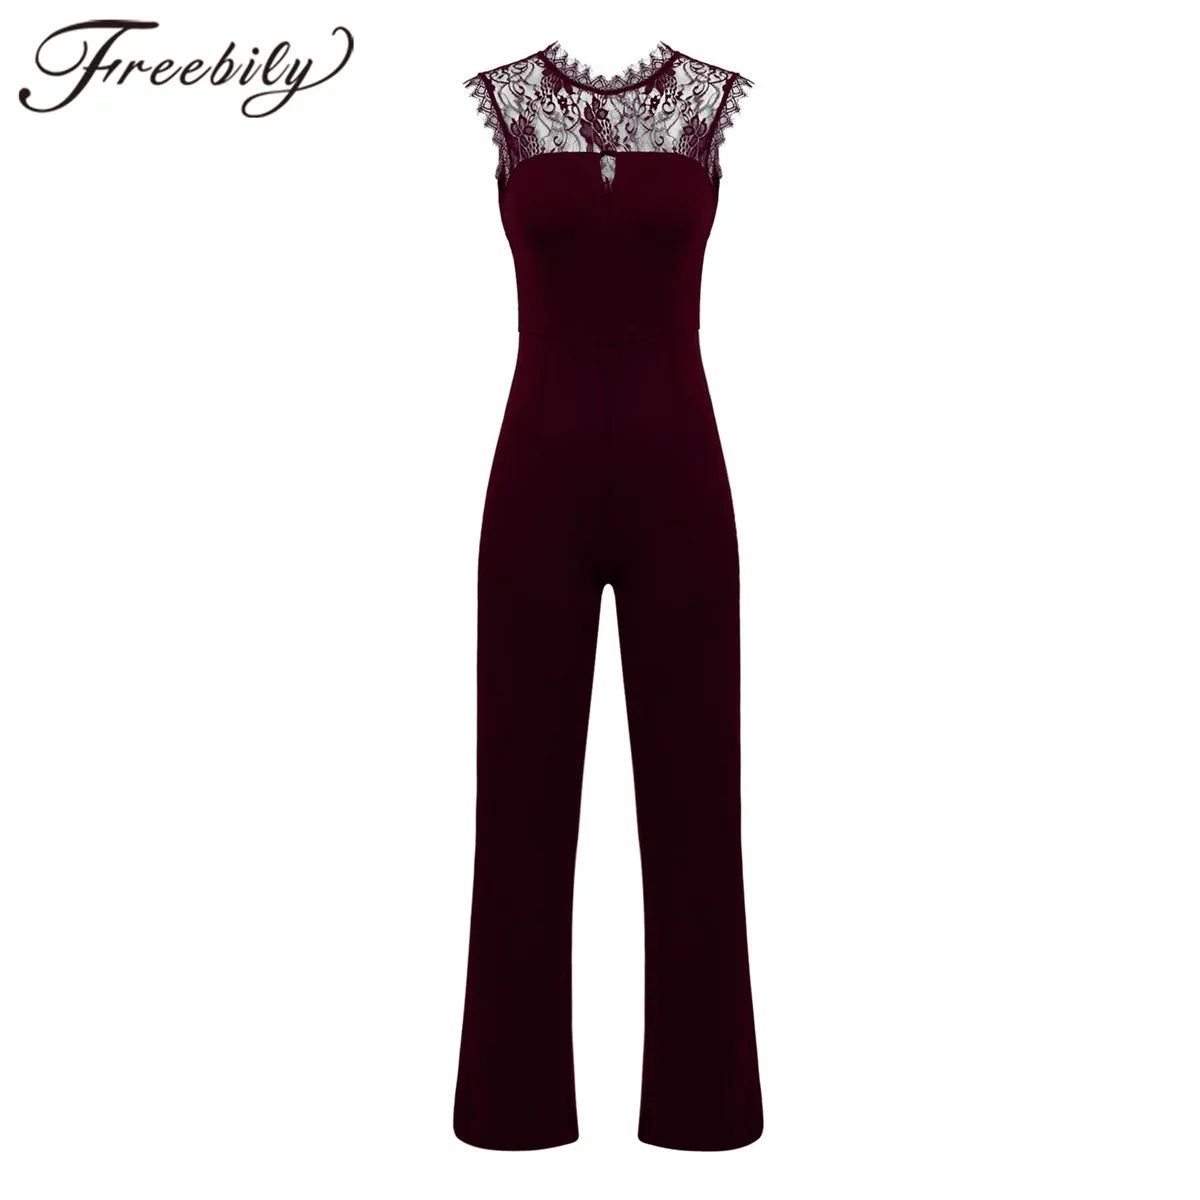 

Women's Ladies Gymnastic Trousers Lace Floral Sleeveless High Waisted Wide Leg Pants Rompers Formal Jumpsuit Elegant Dance Wear